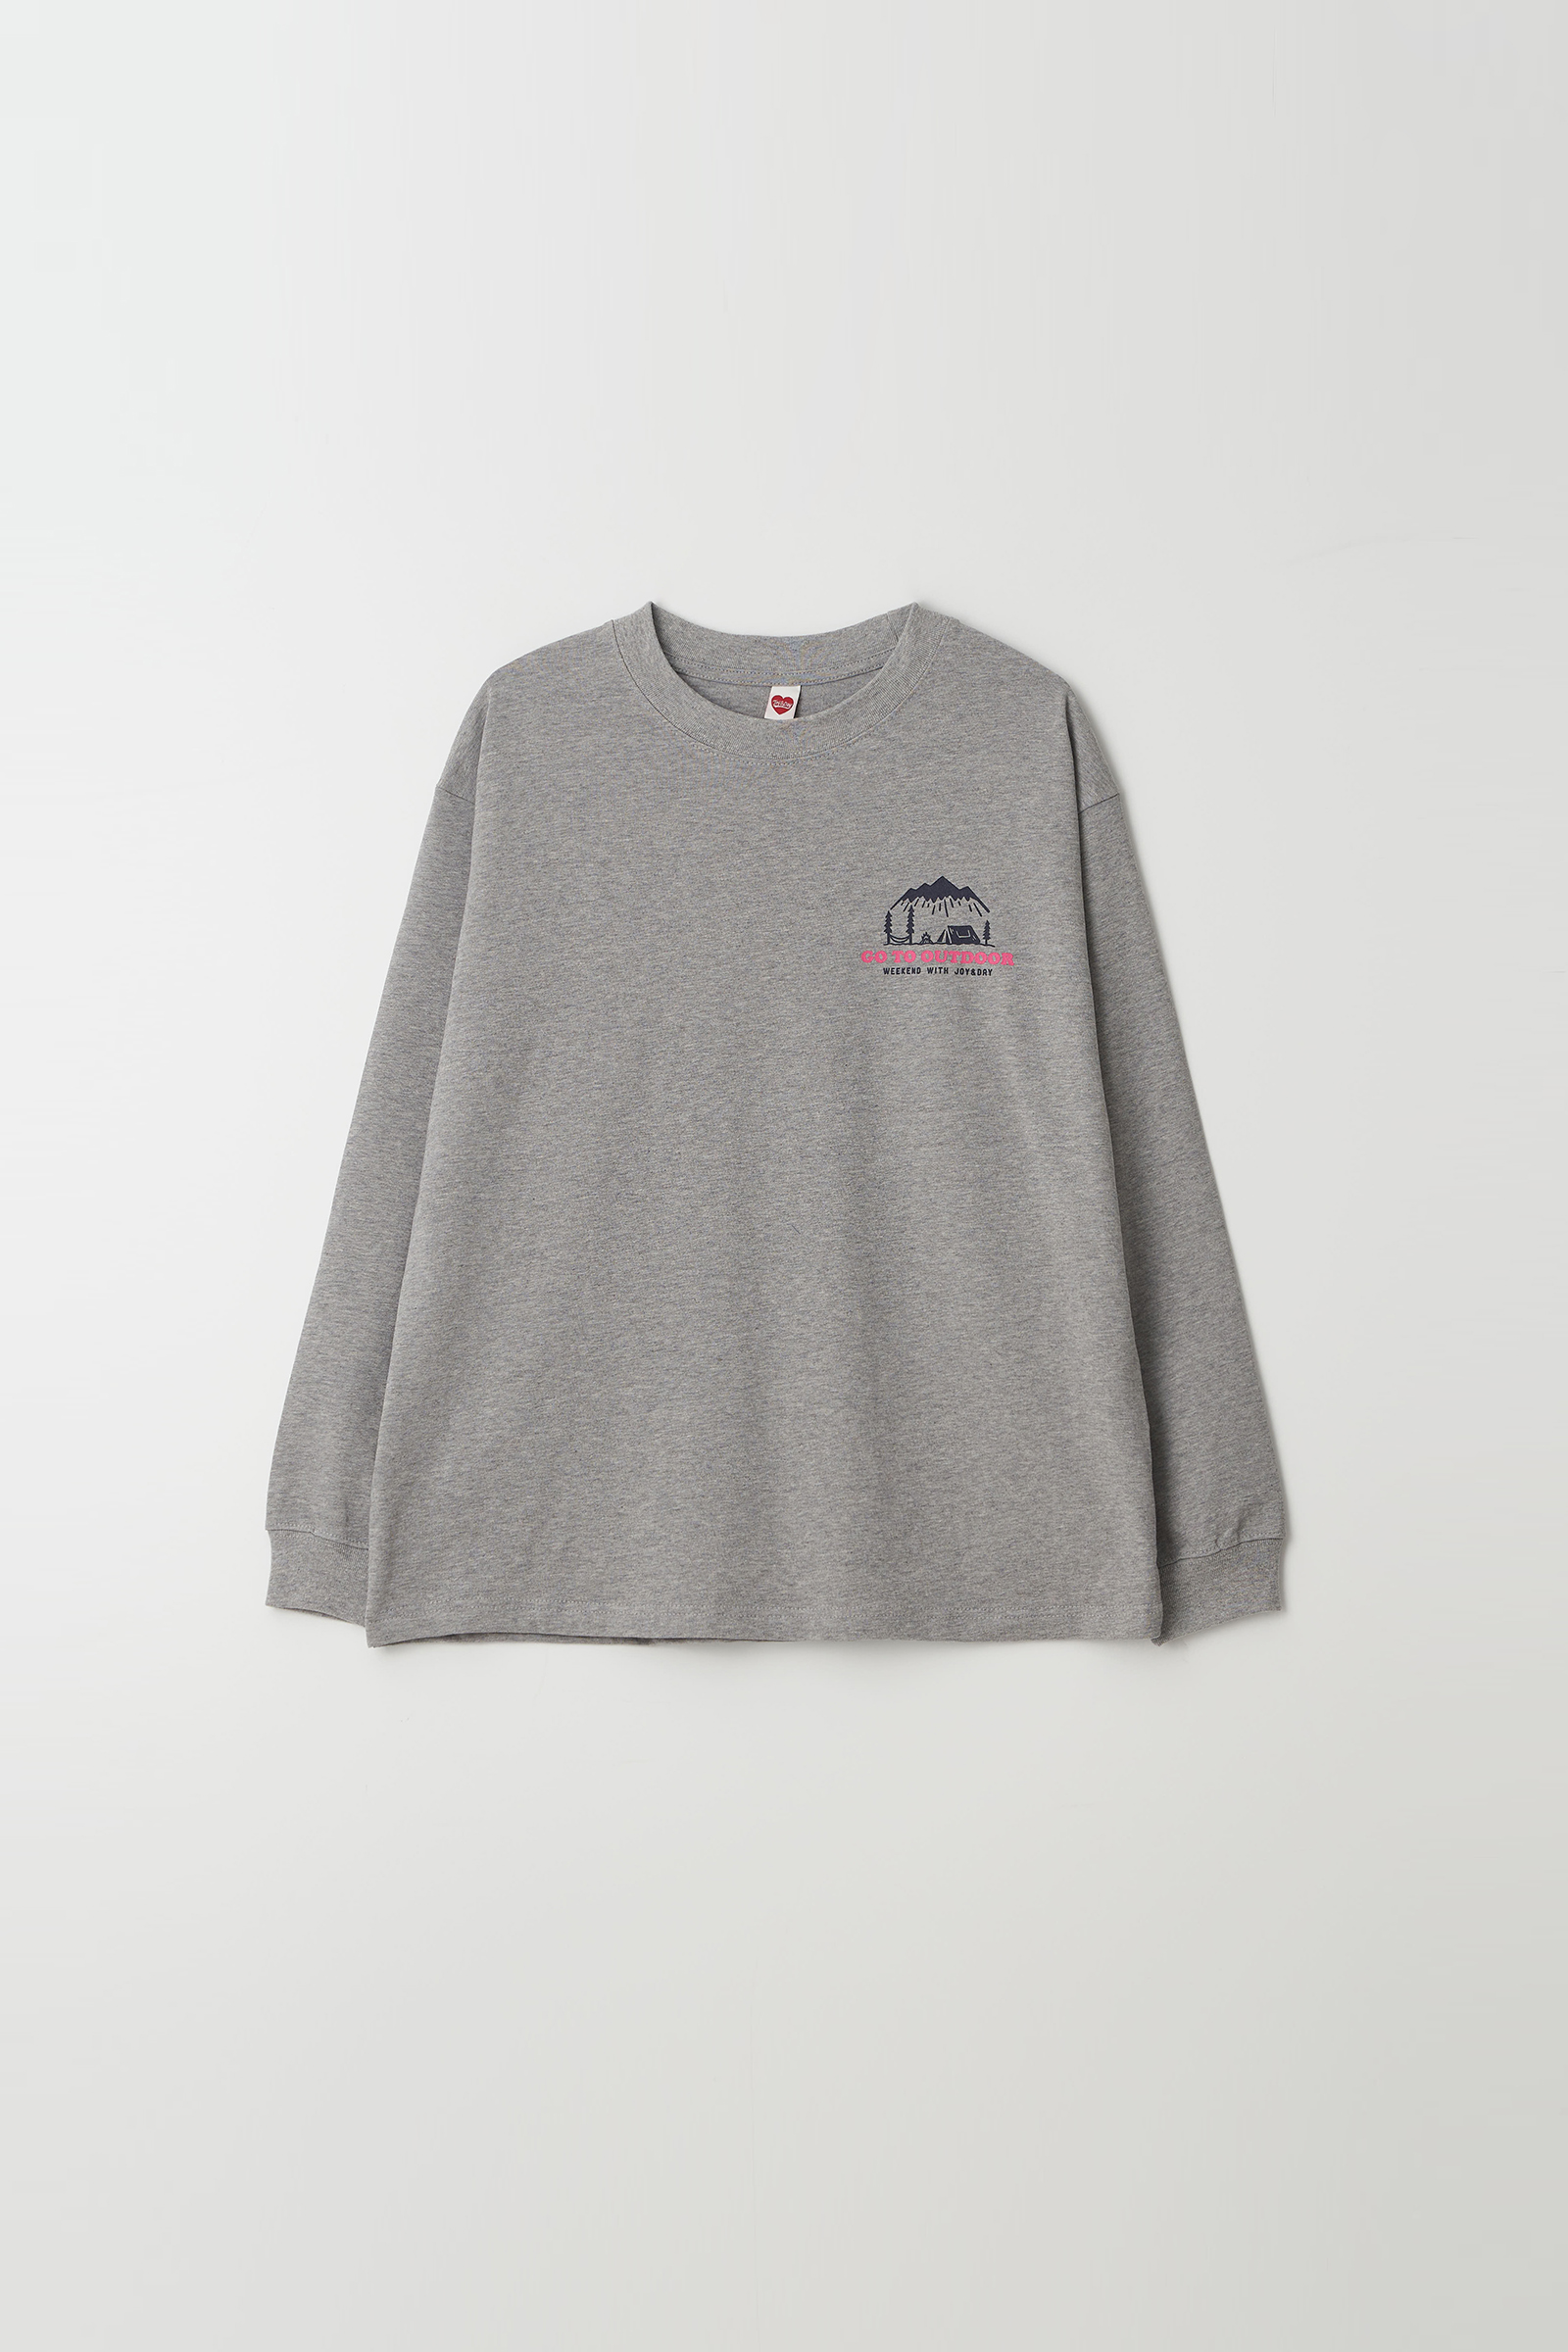 [2nd] Go To Outdoor Long Tee